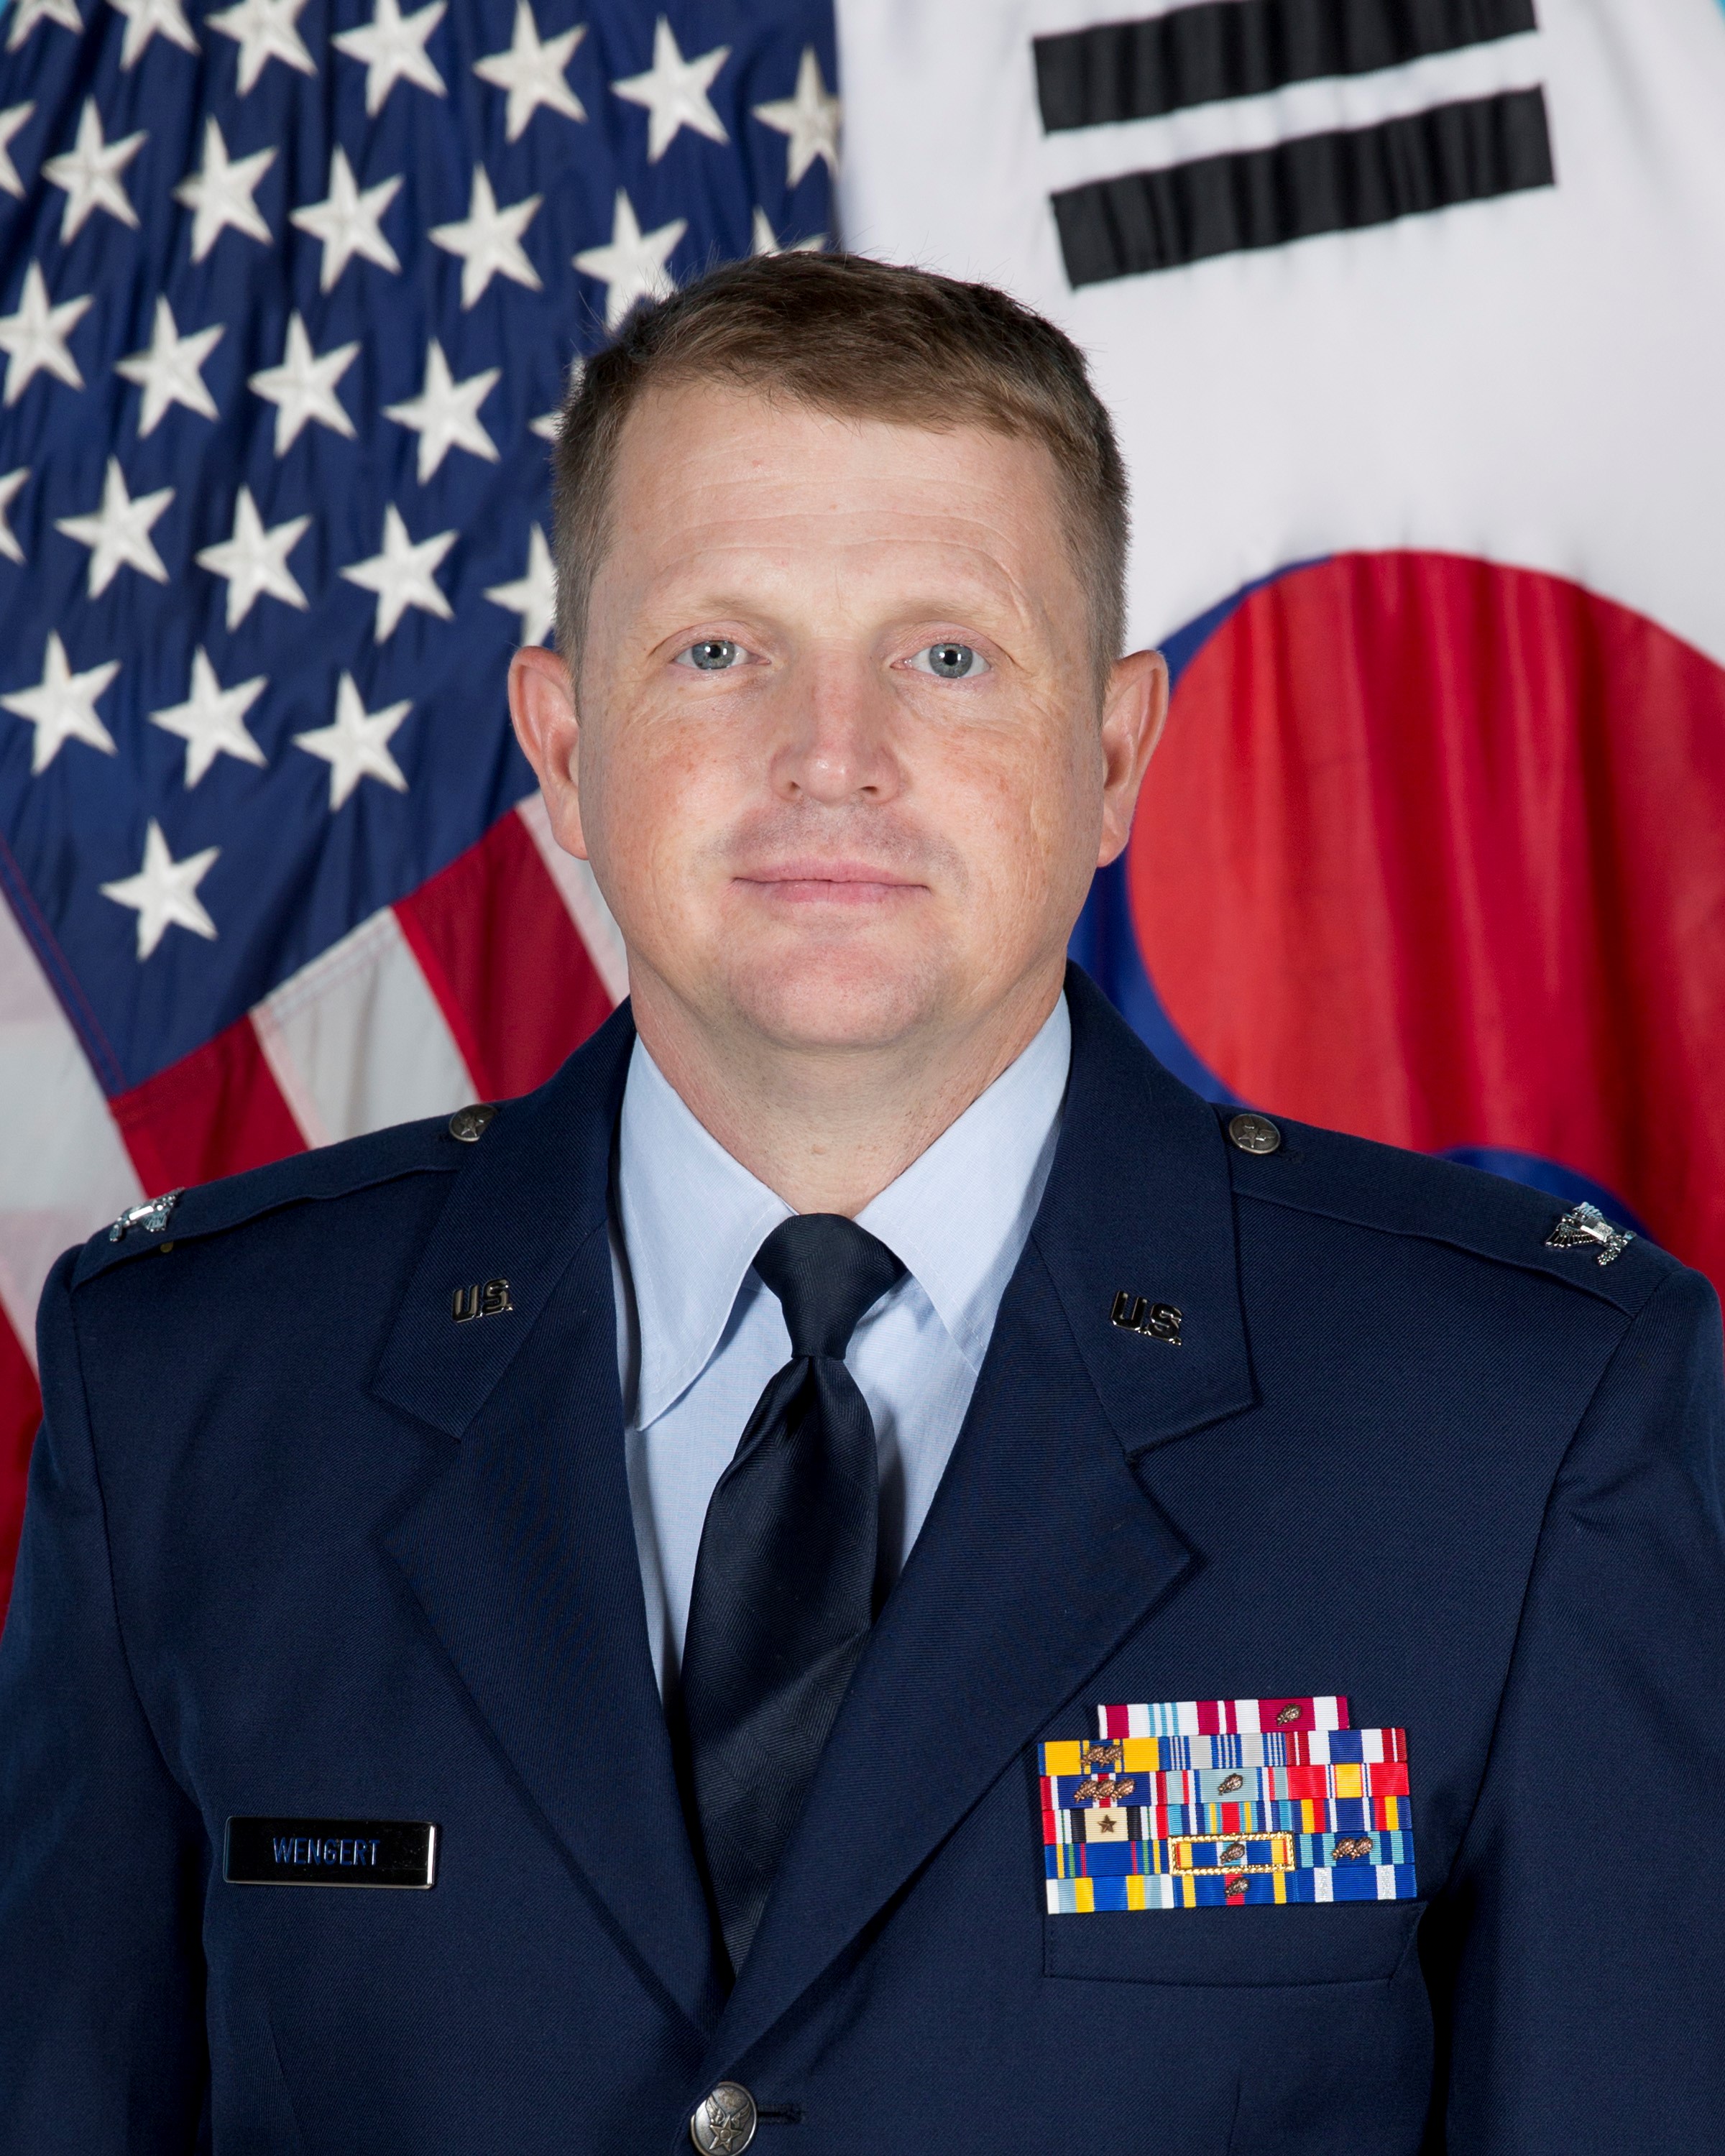 USFK Assistant Chief of Staff J1 - Colonel Brandon. D Wengert